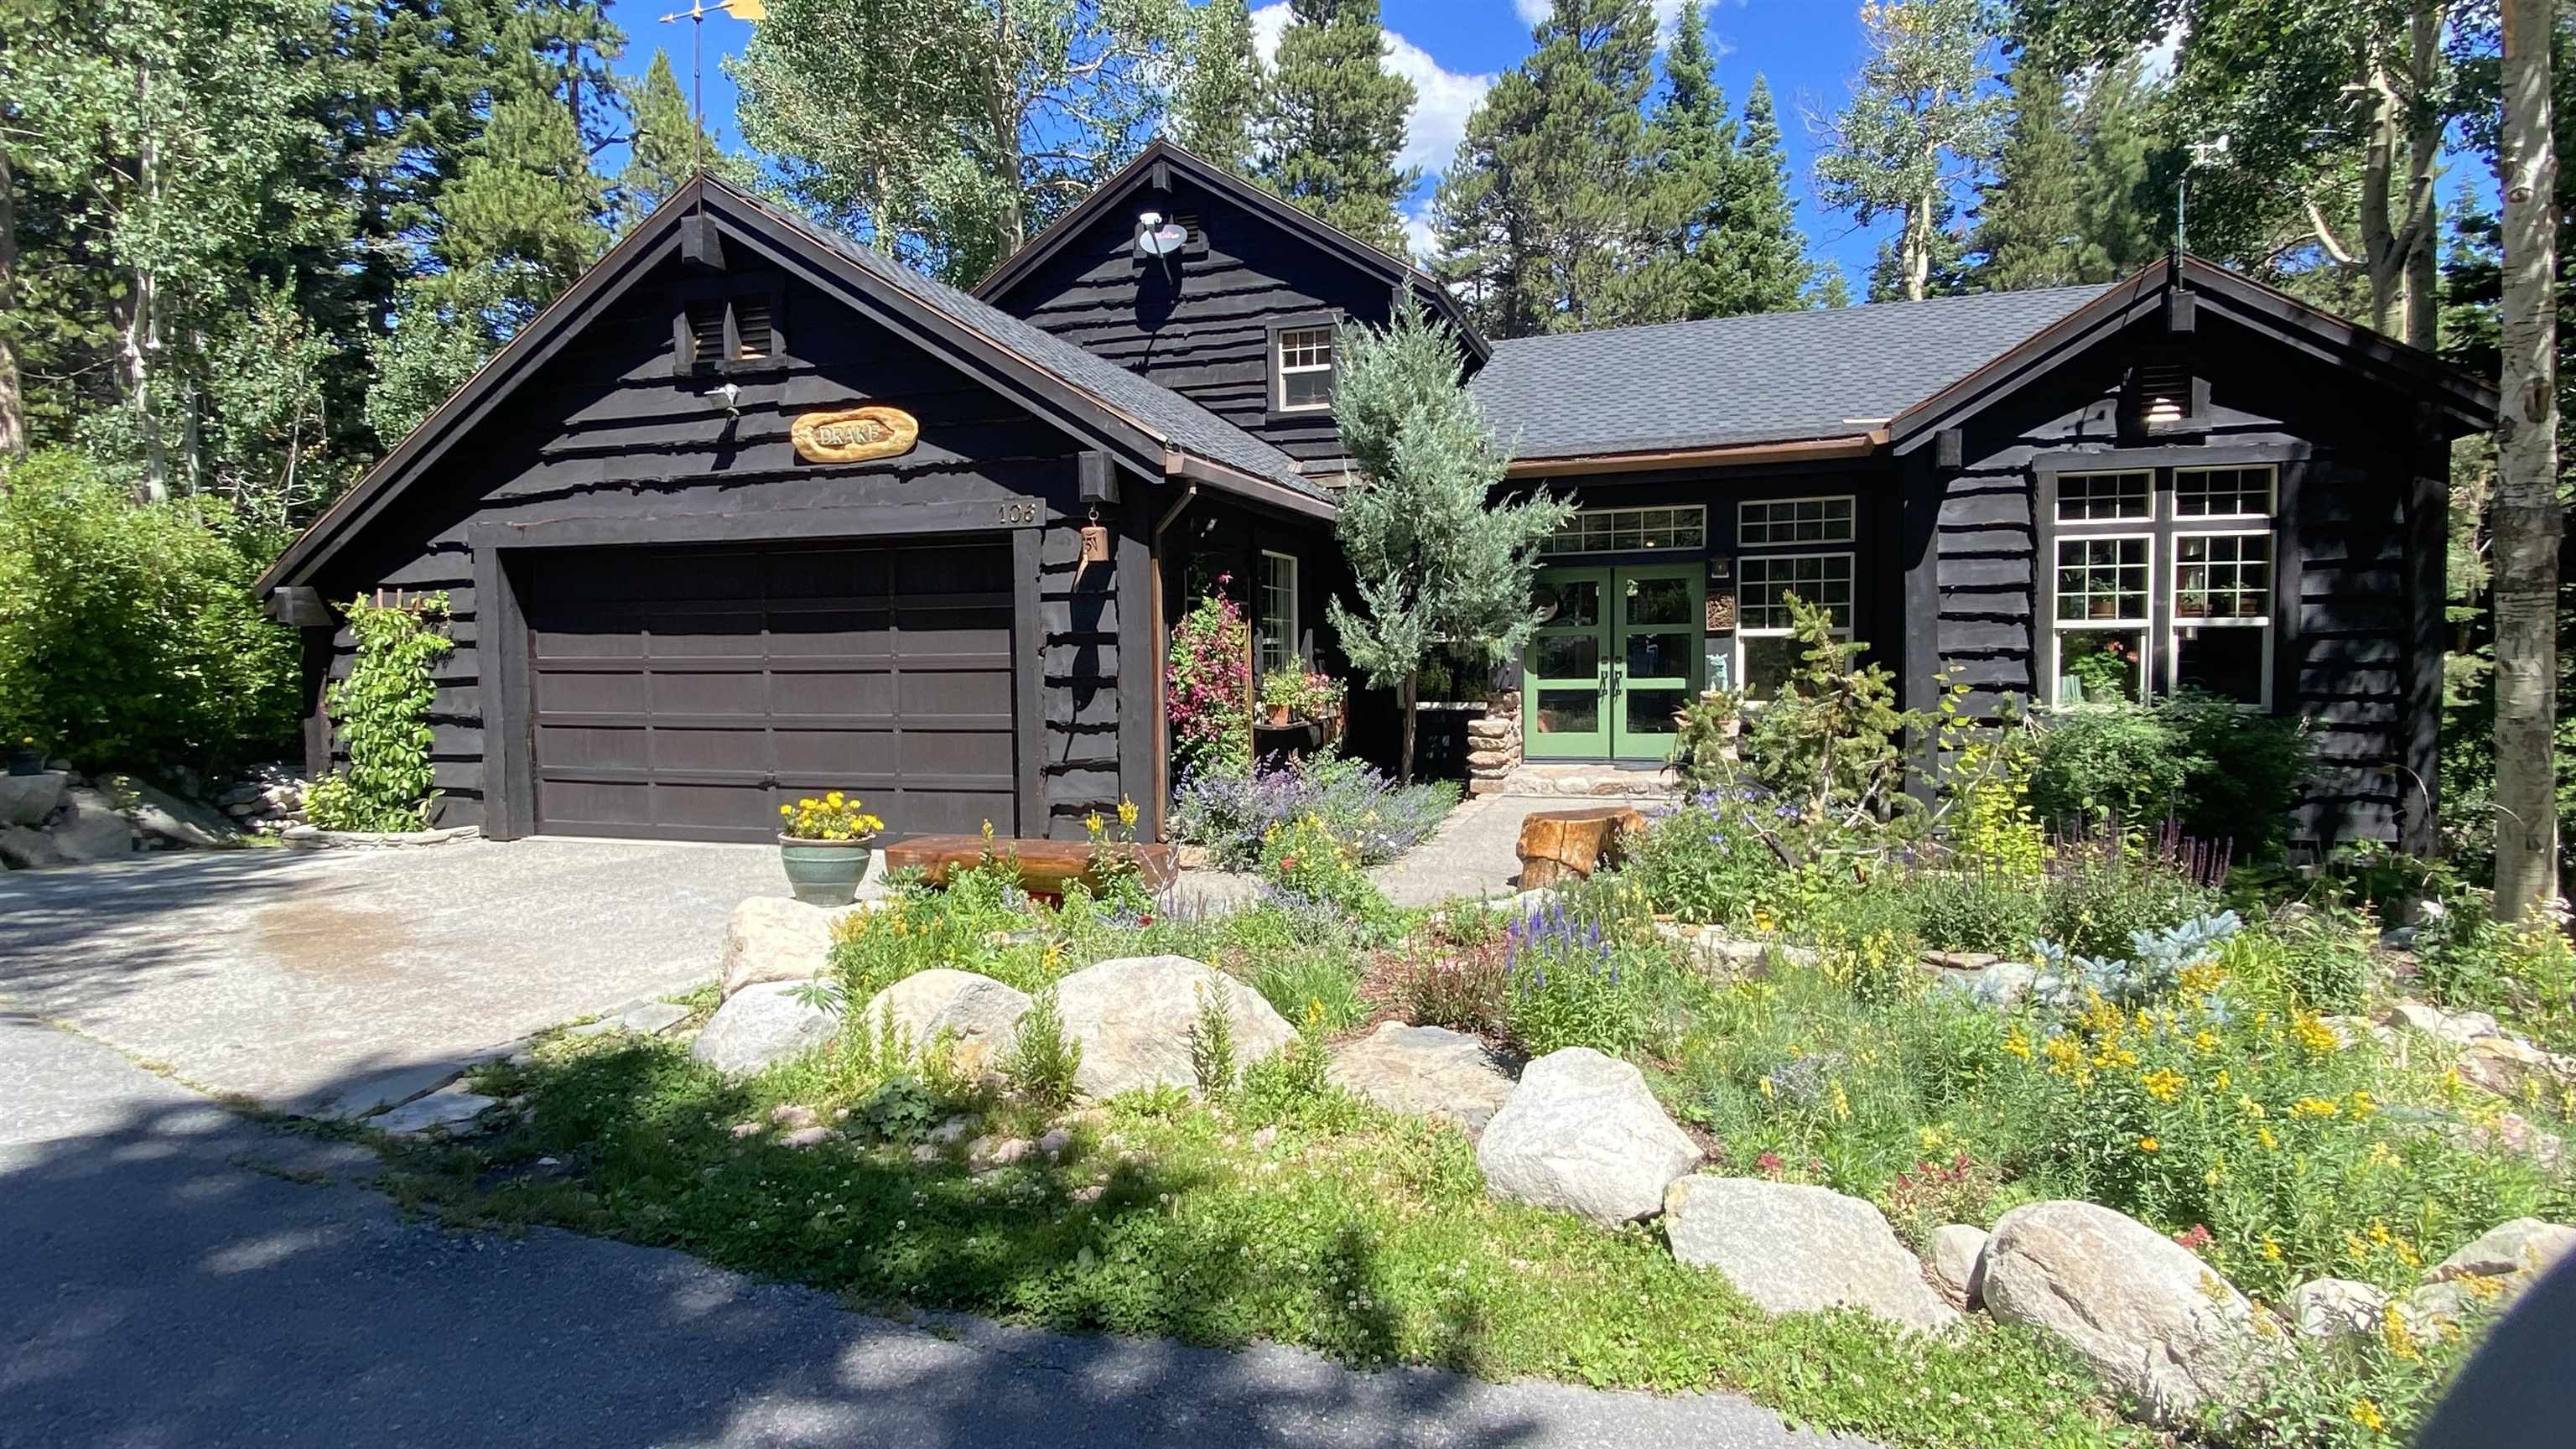 106 Connell Rd., Mammoth Lakes, CA 93546